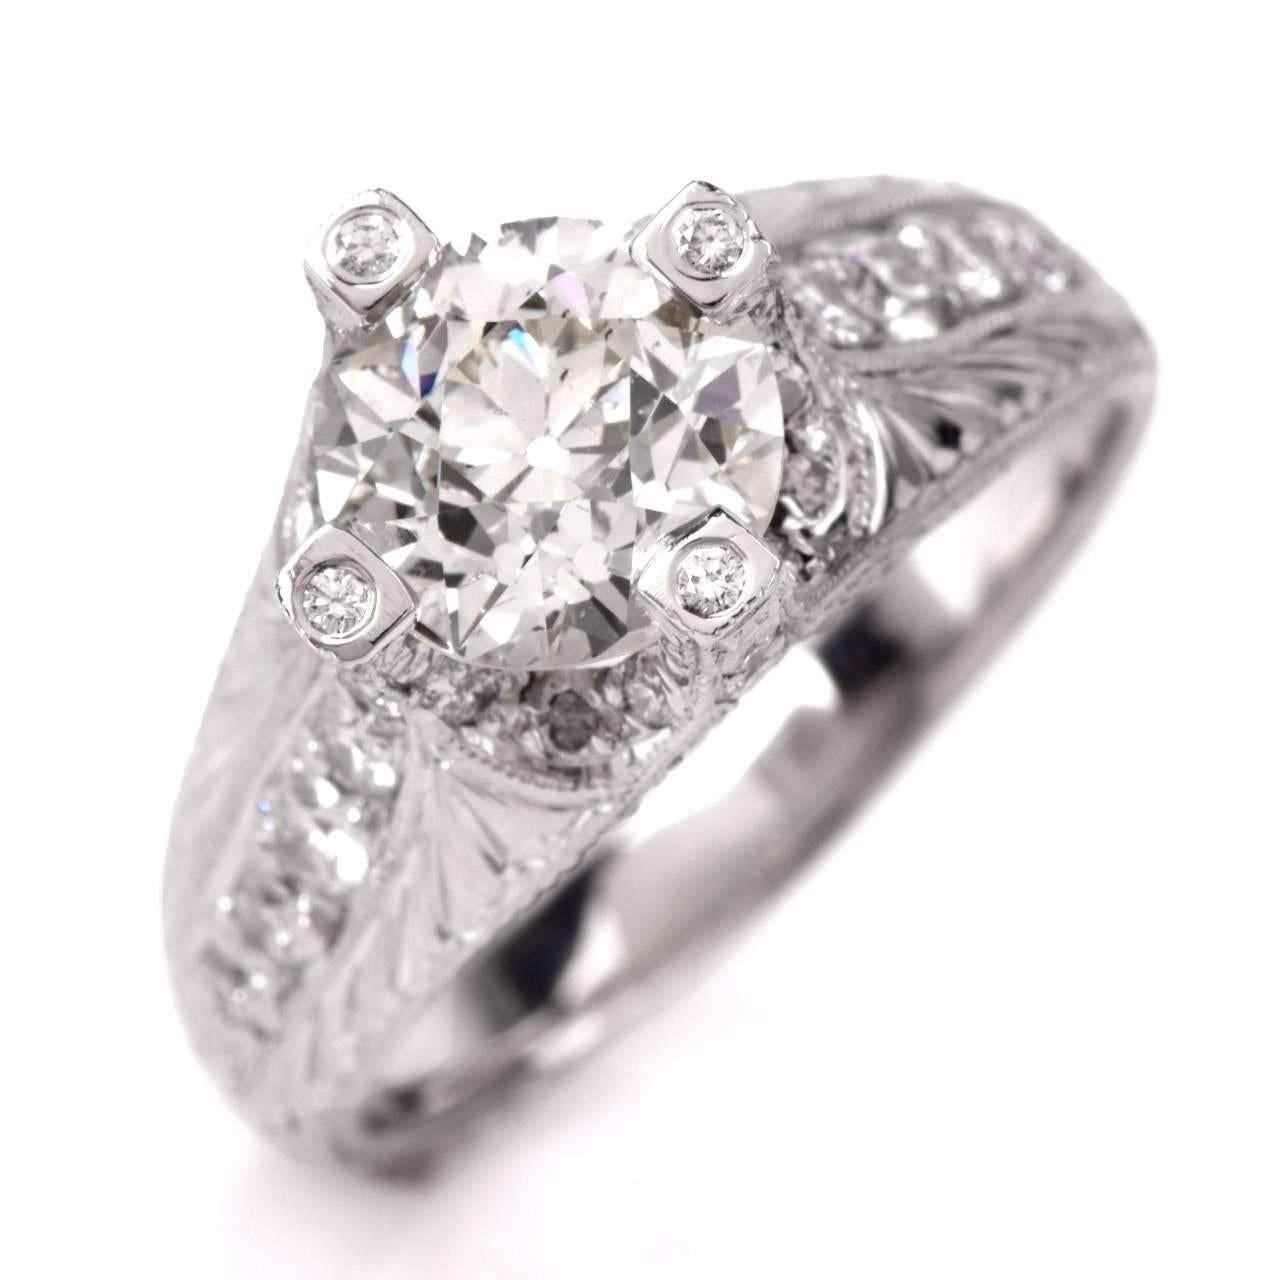 This gorgeous engagement shines with brilliance and sophistication. Finely crafted in solid platinum. It is centered with 1 genuine European-cut round diamond approx. 1.80t, I-J color, and VS1 clarity. Its mounting is set with 14 round diamonds